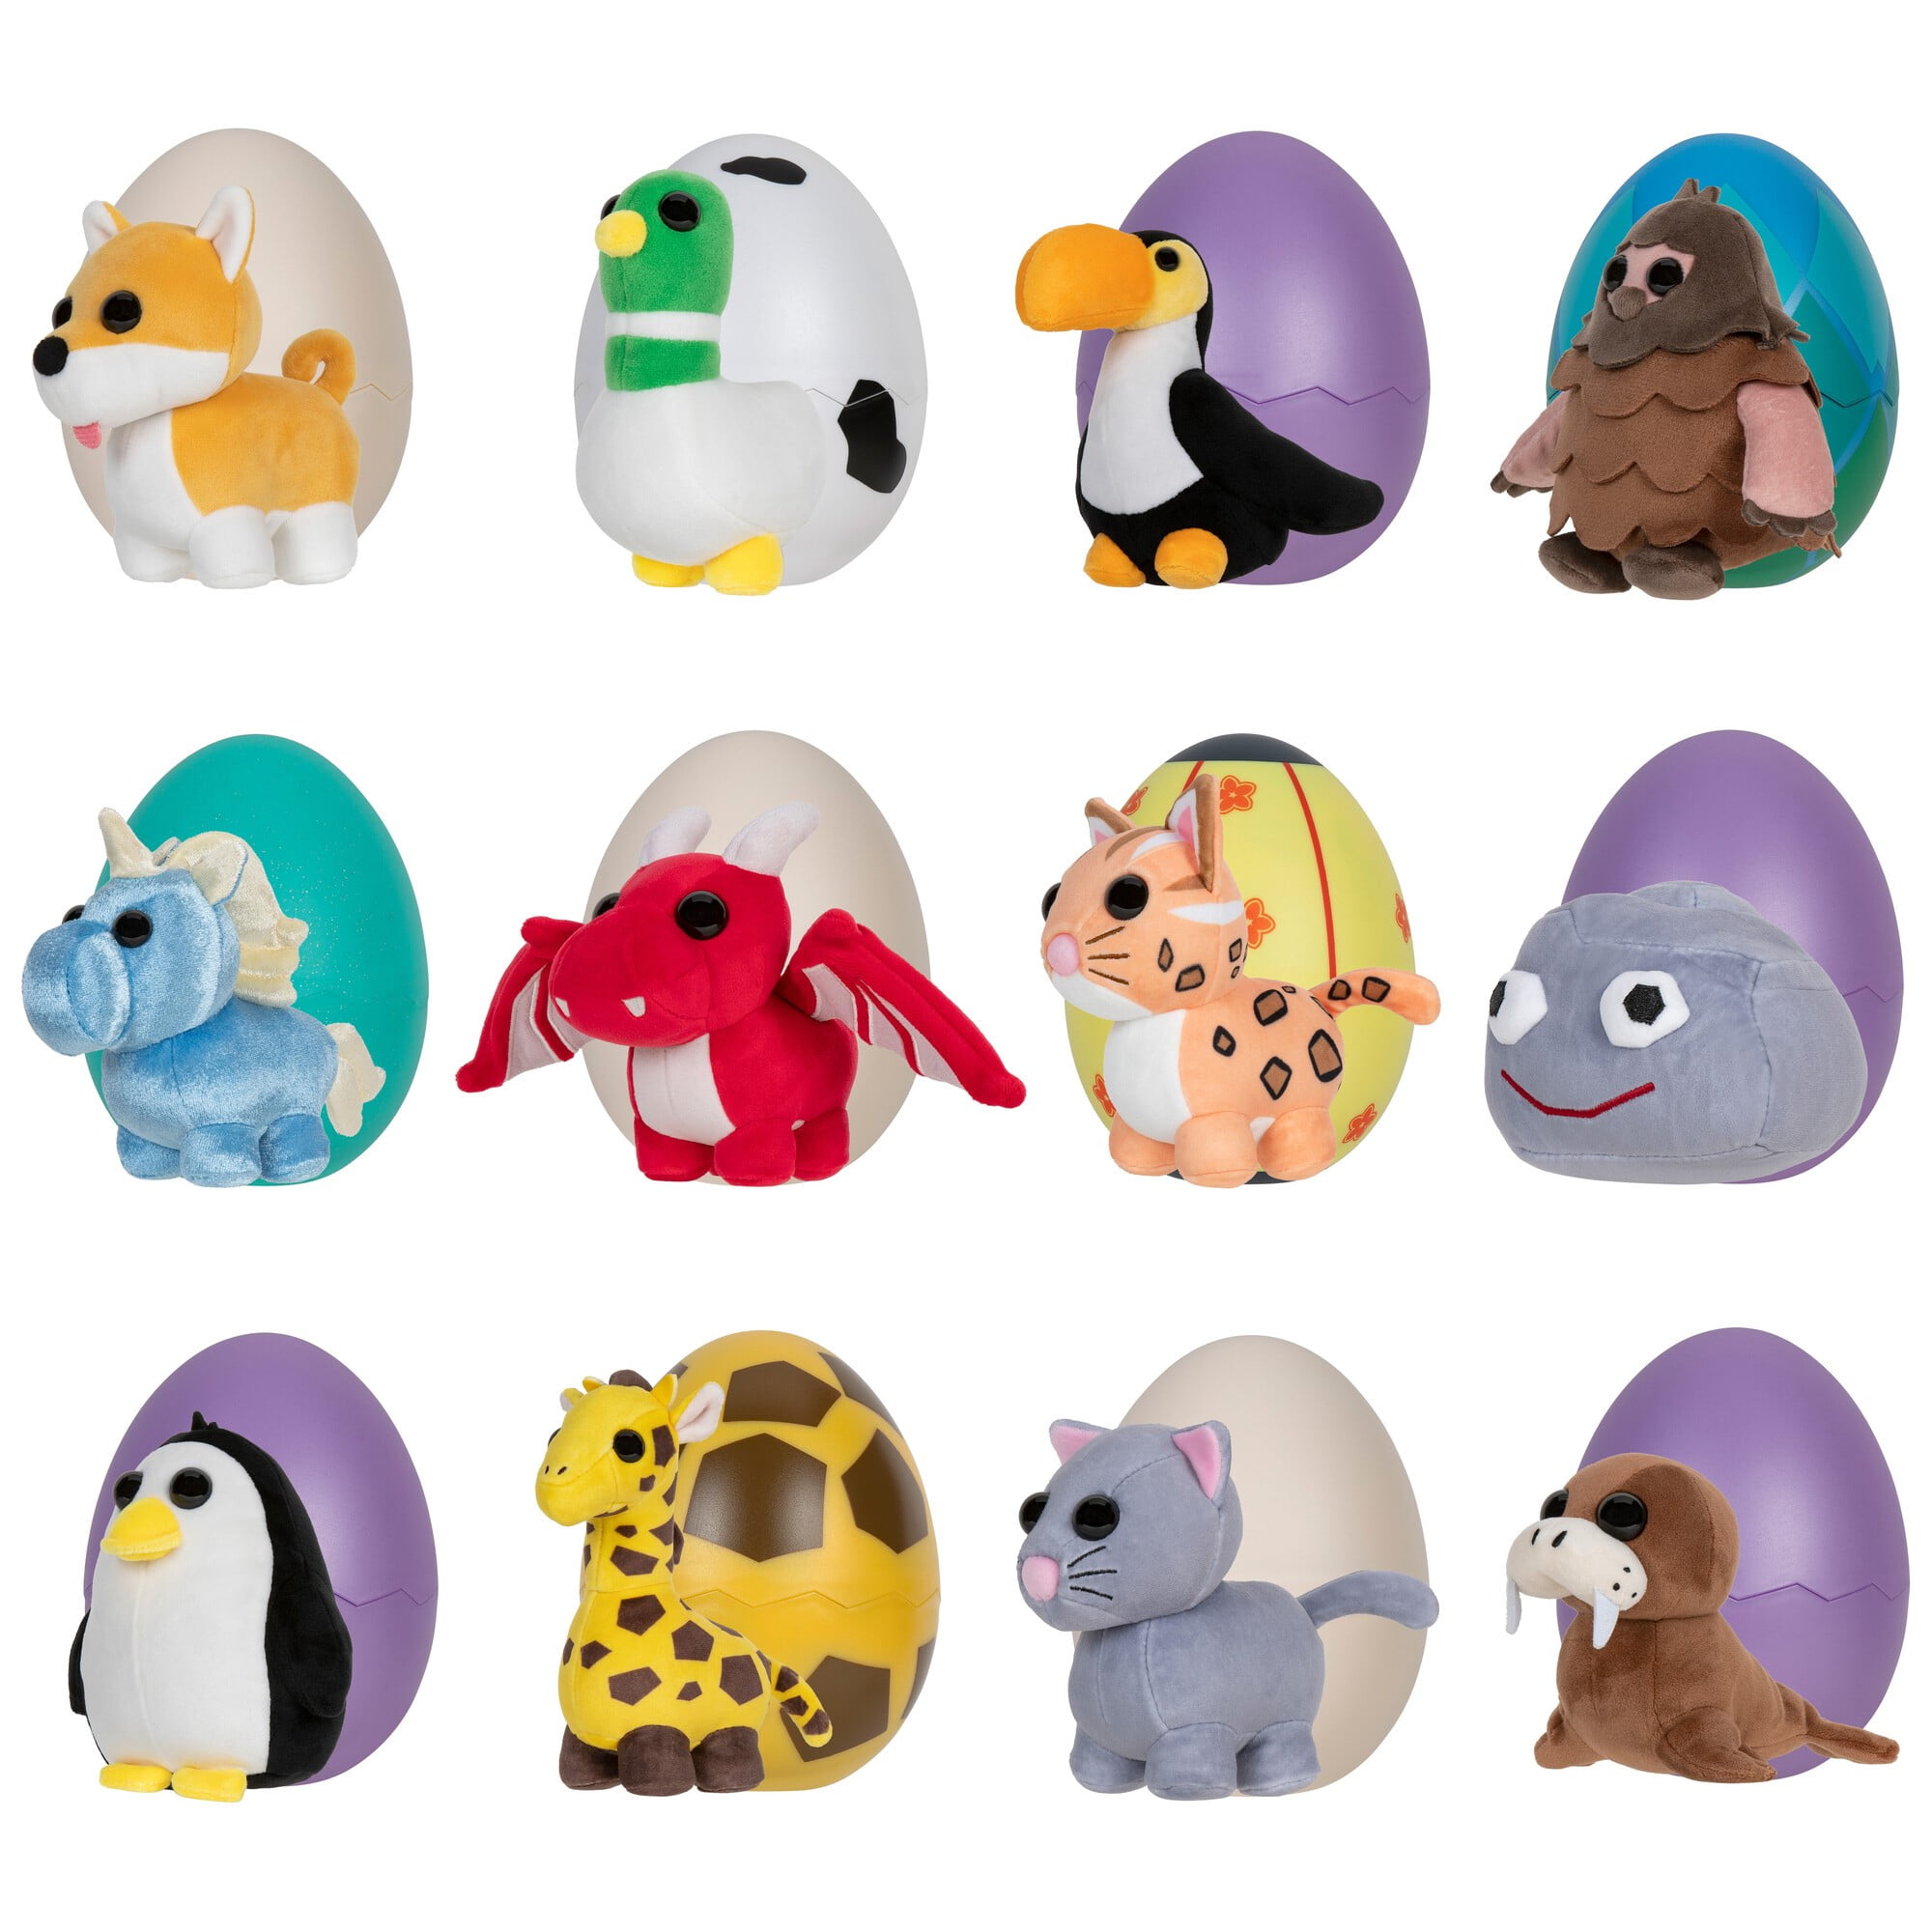 Every Mythic Egg Pet in Roblox Adopt Me!